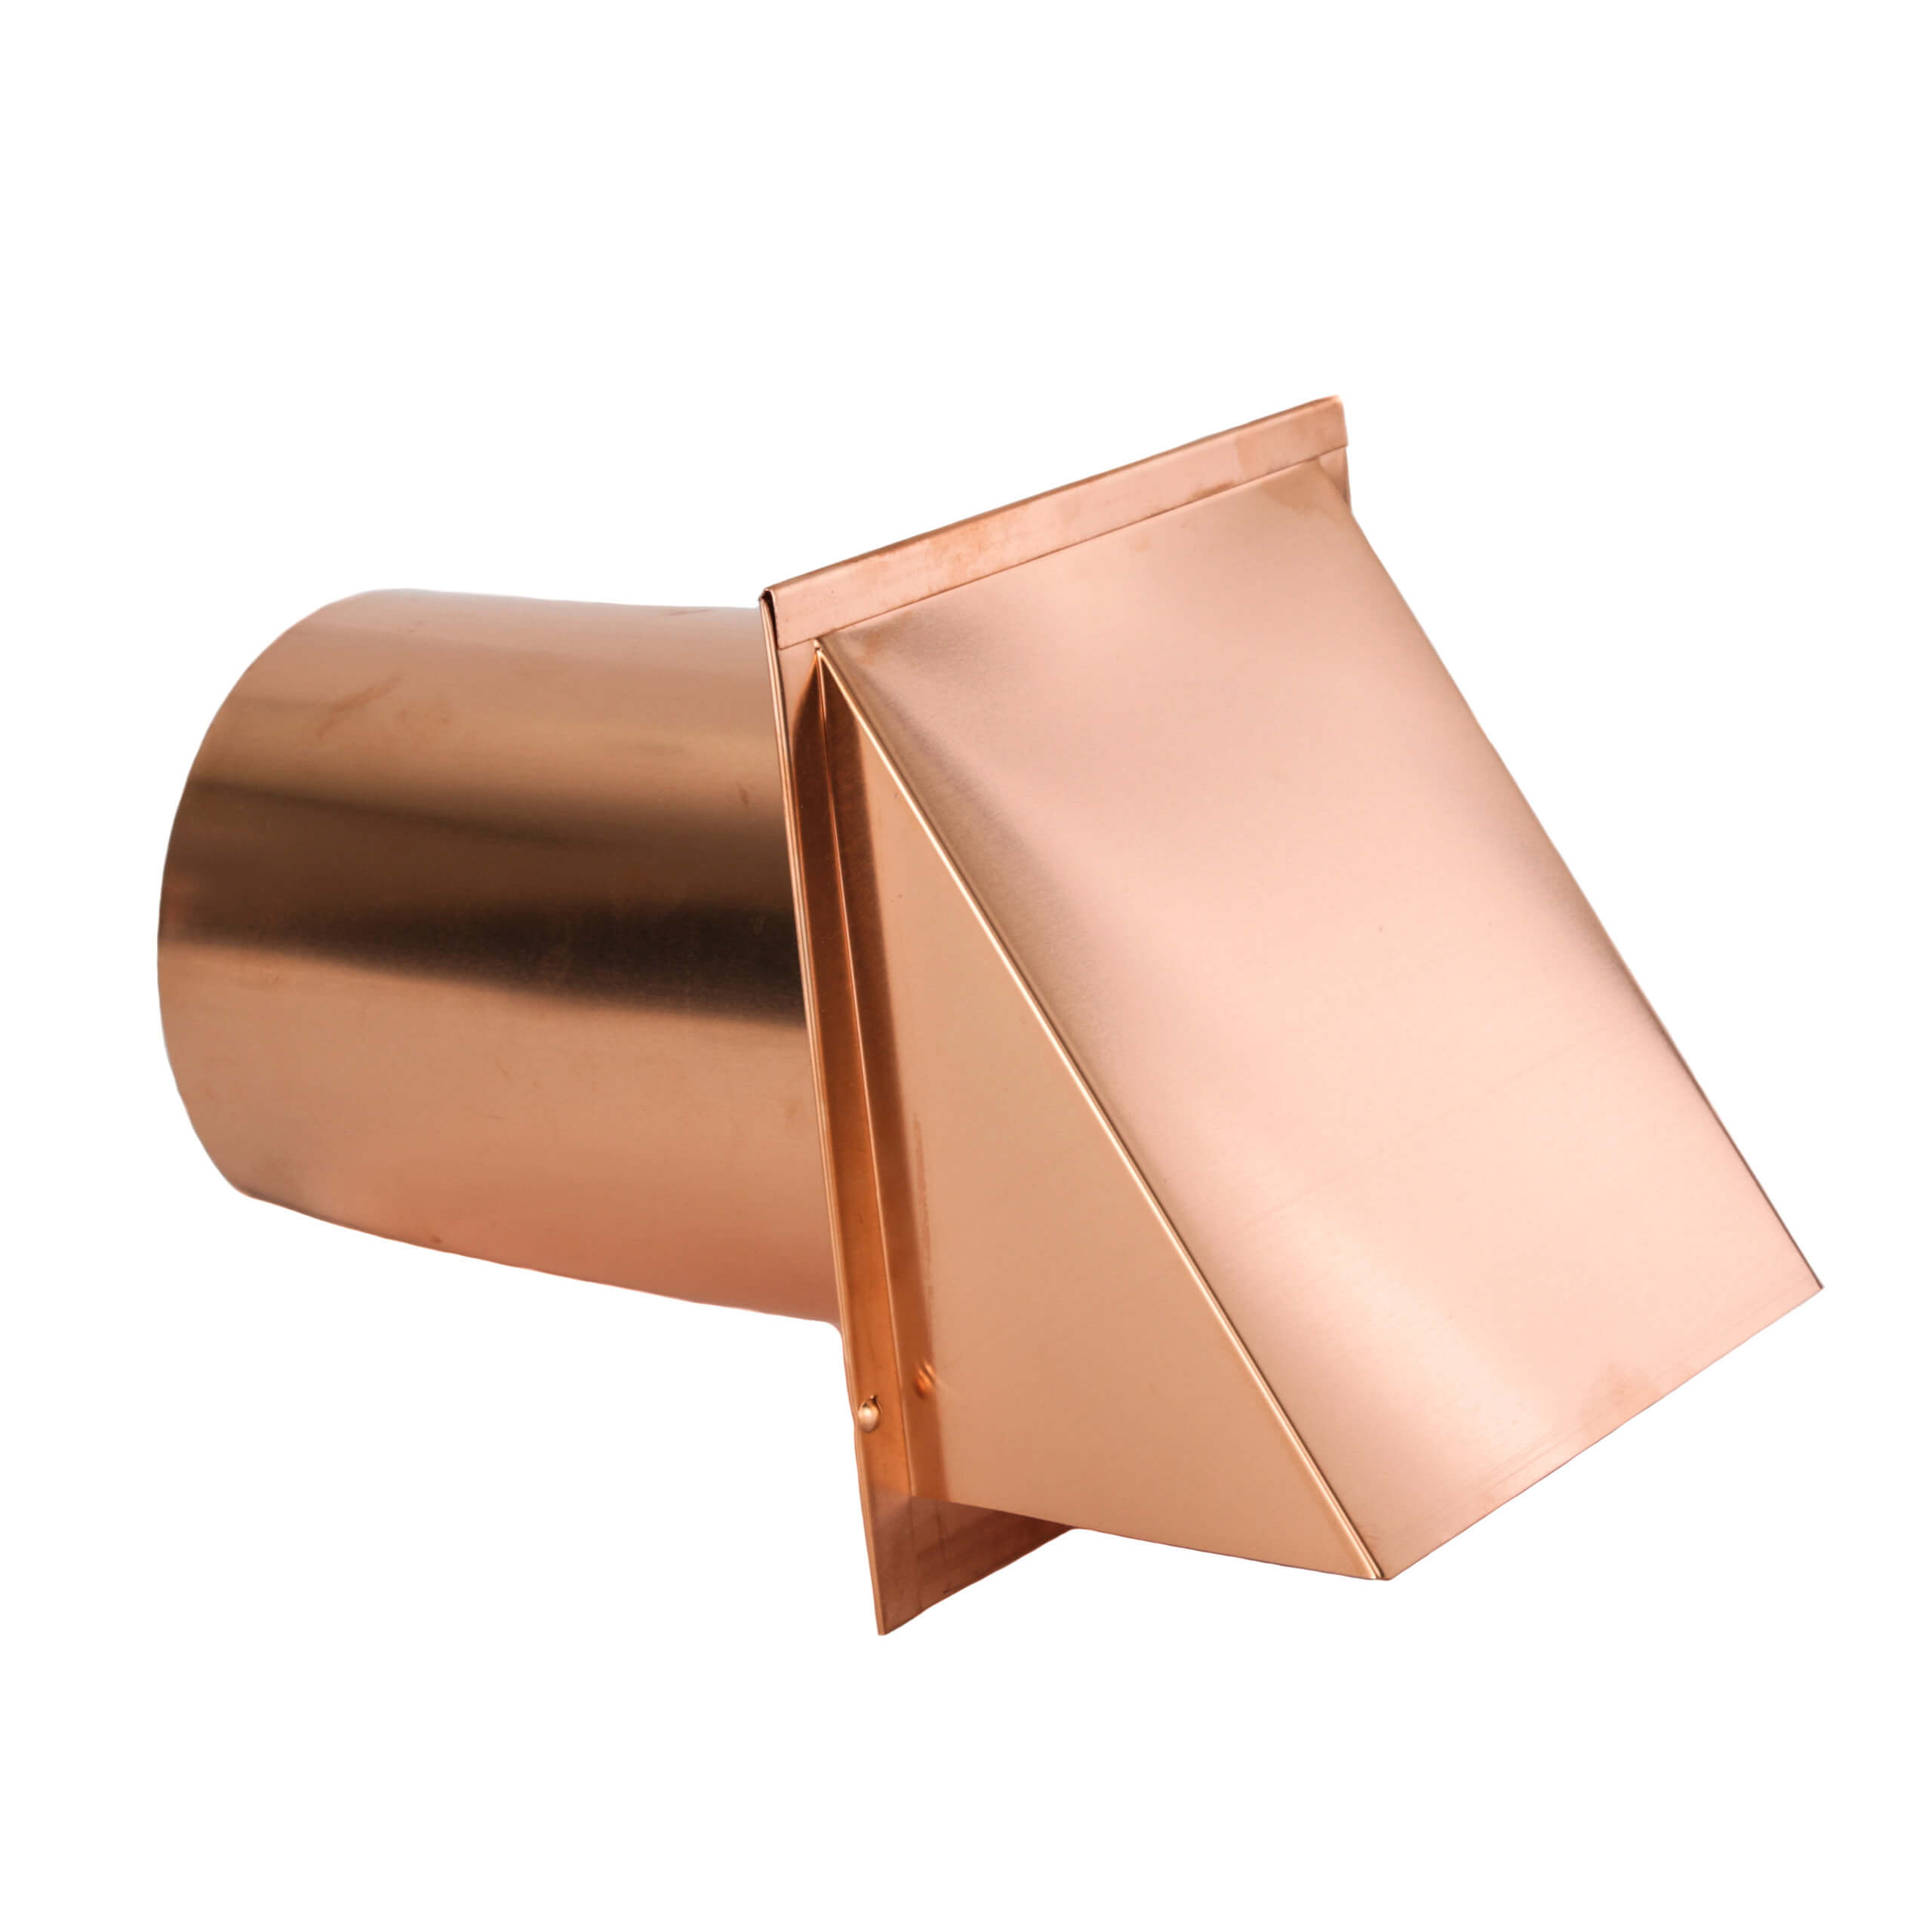 FAMCO Copper Wall Vent with Damper